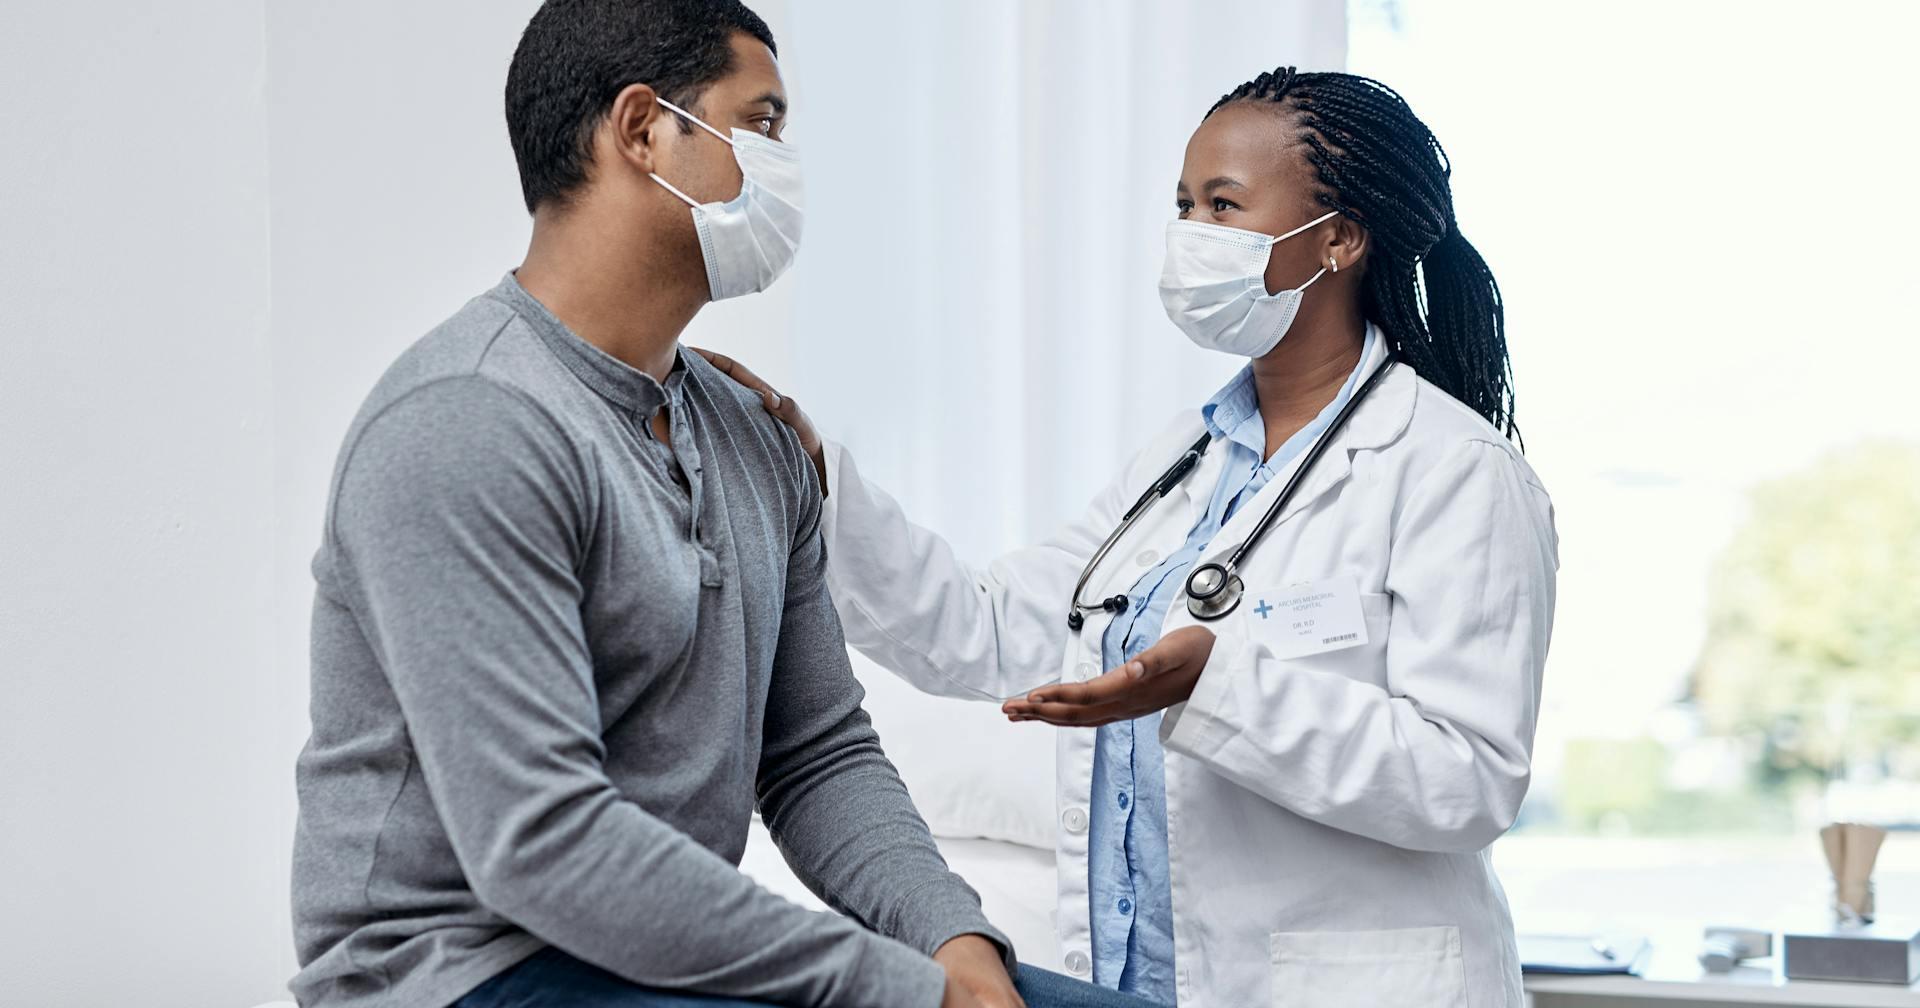 A masked patient talks to a masked doctor.